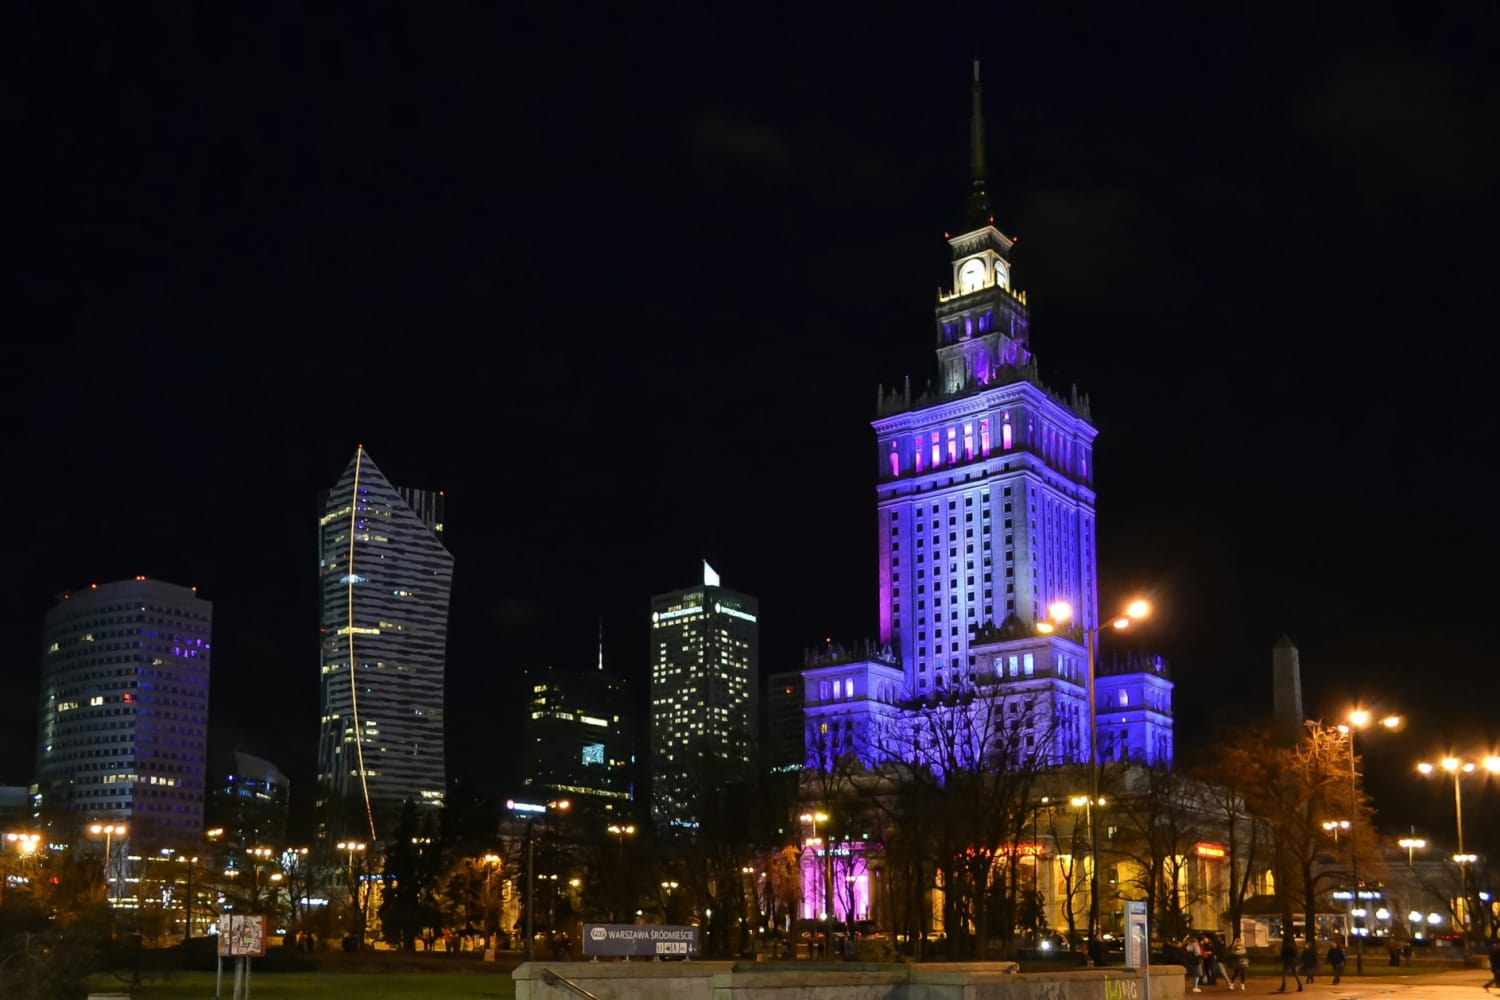 In pictures: Warsaw streets at night